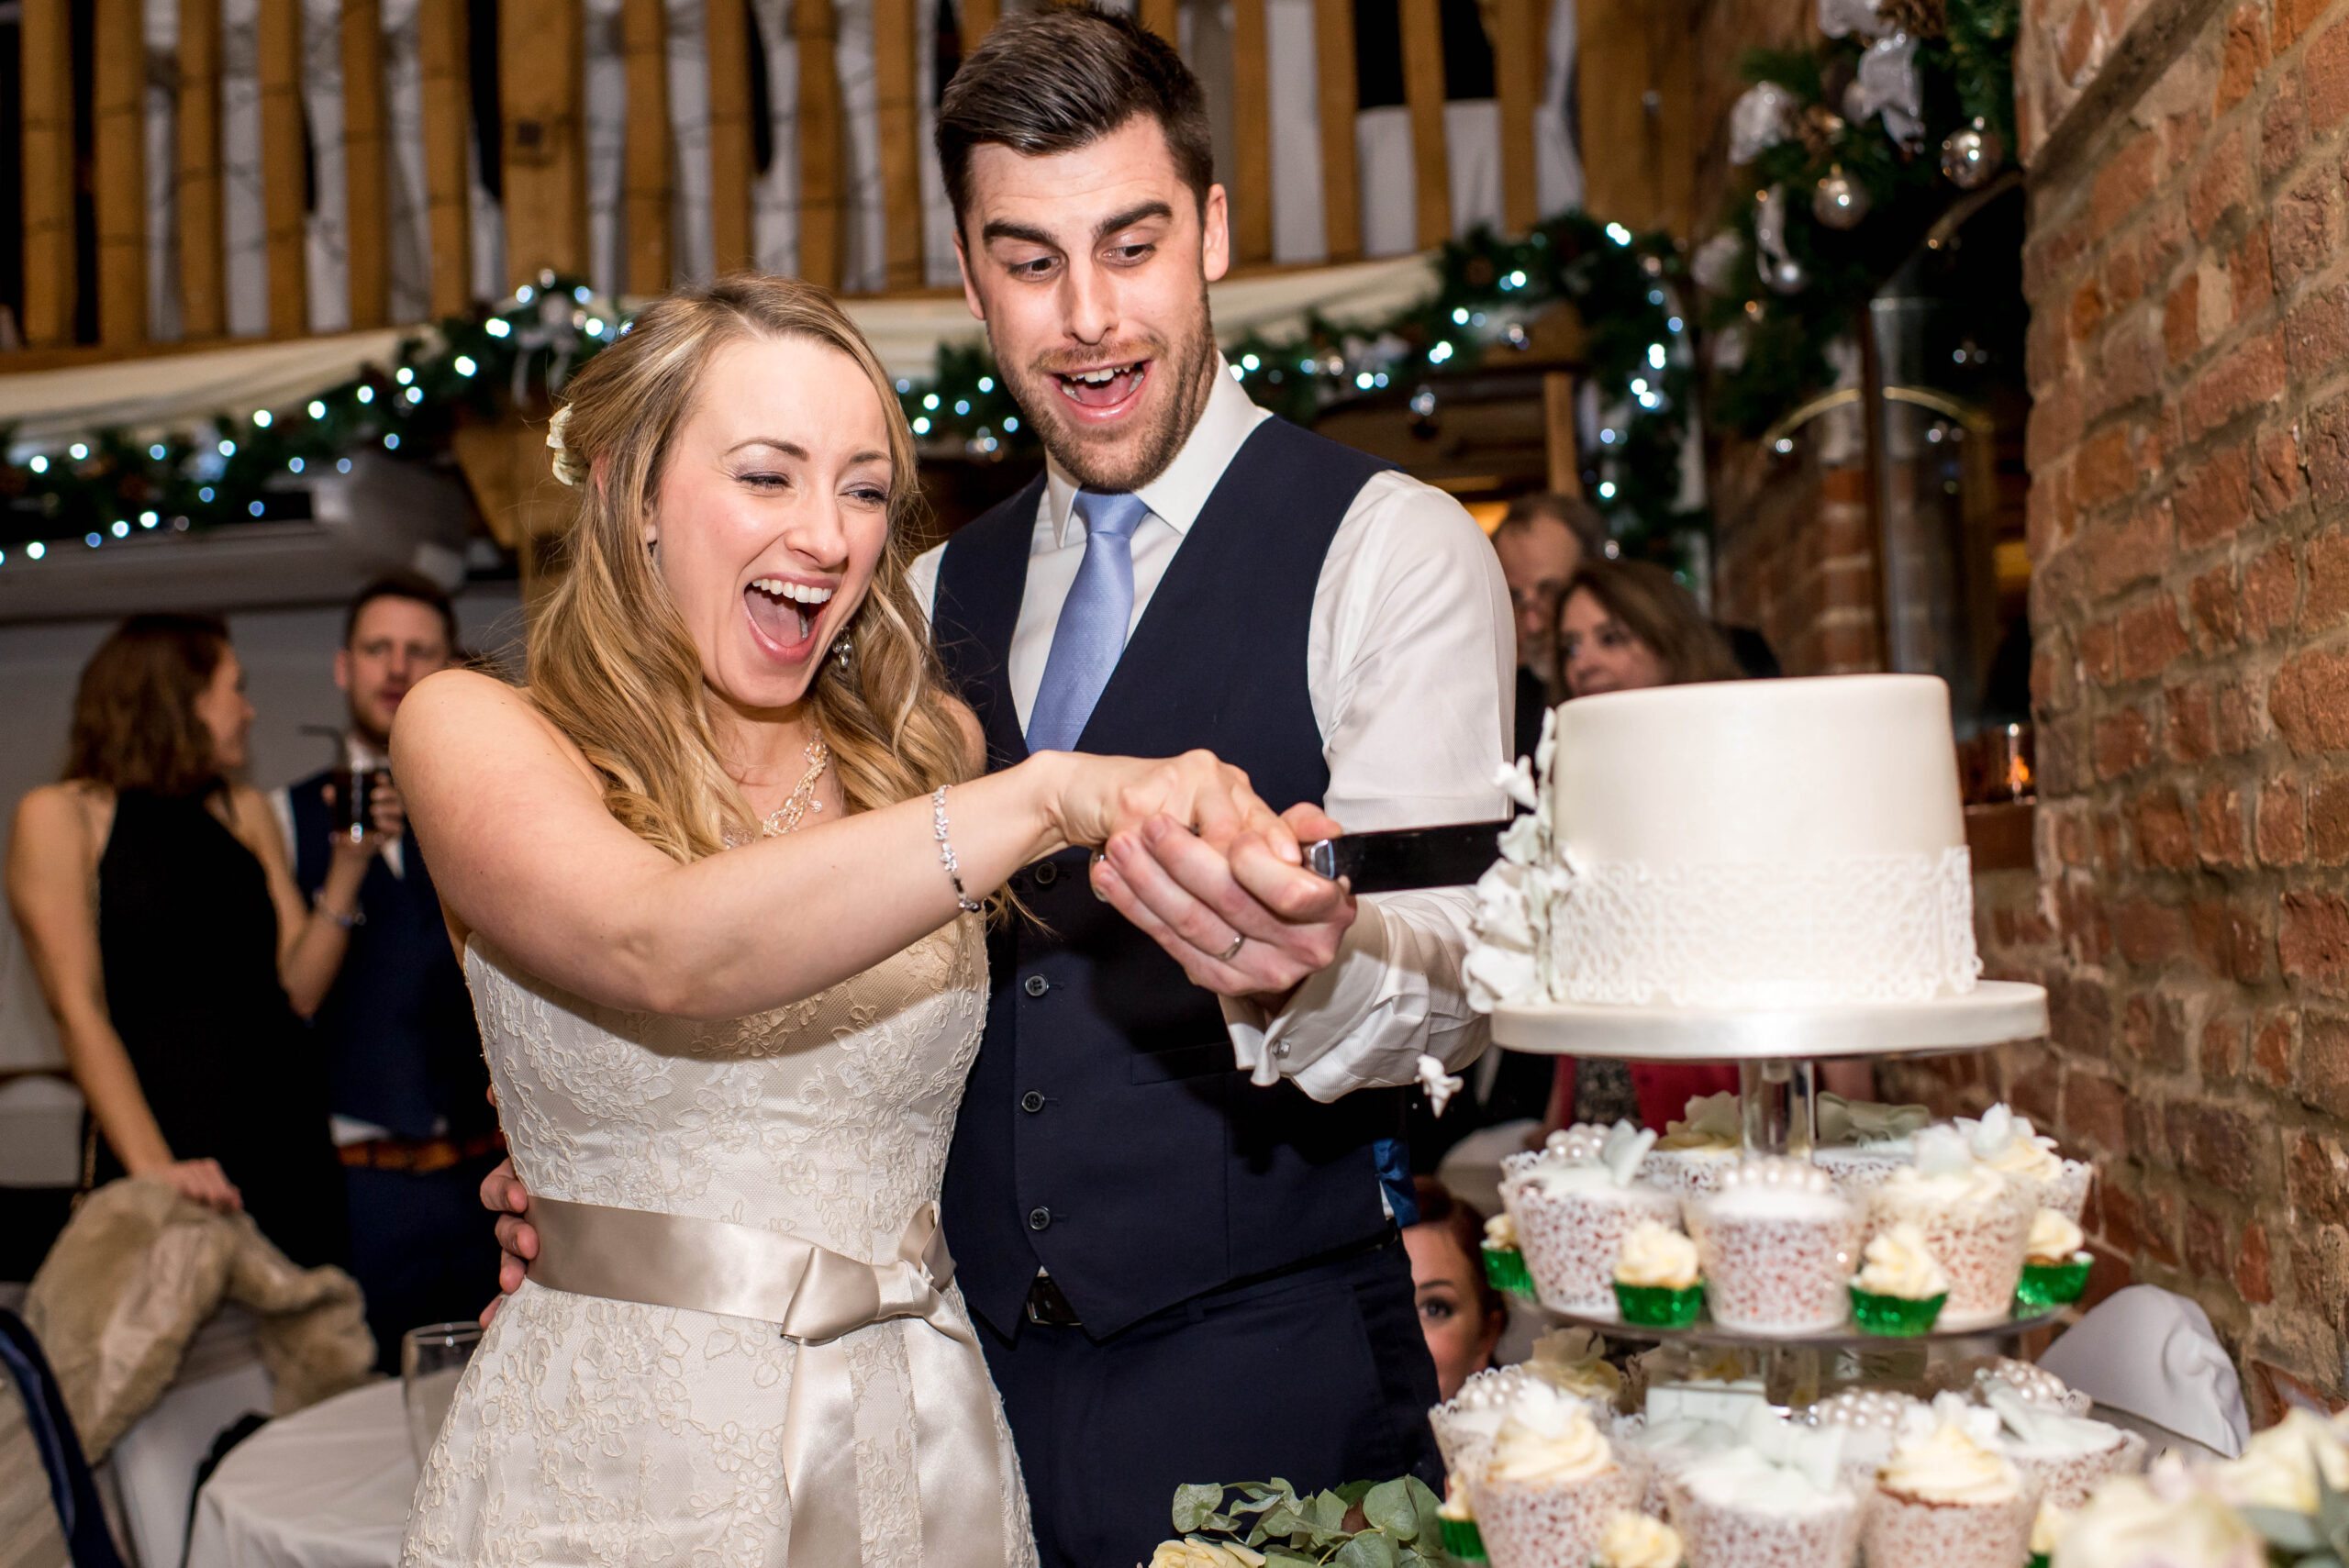 Newlyweds cutting the cake, by Tori Deslauriers Photography